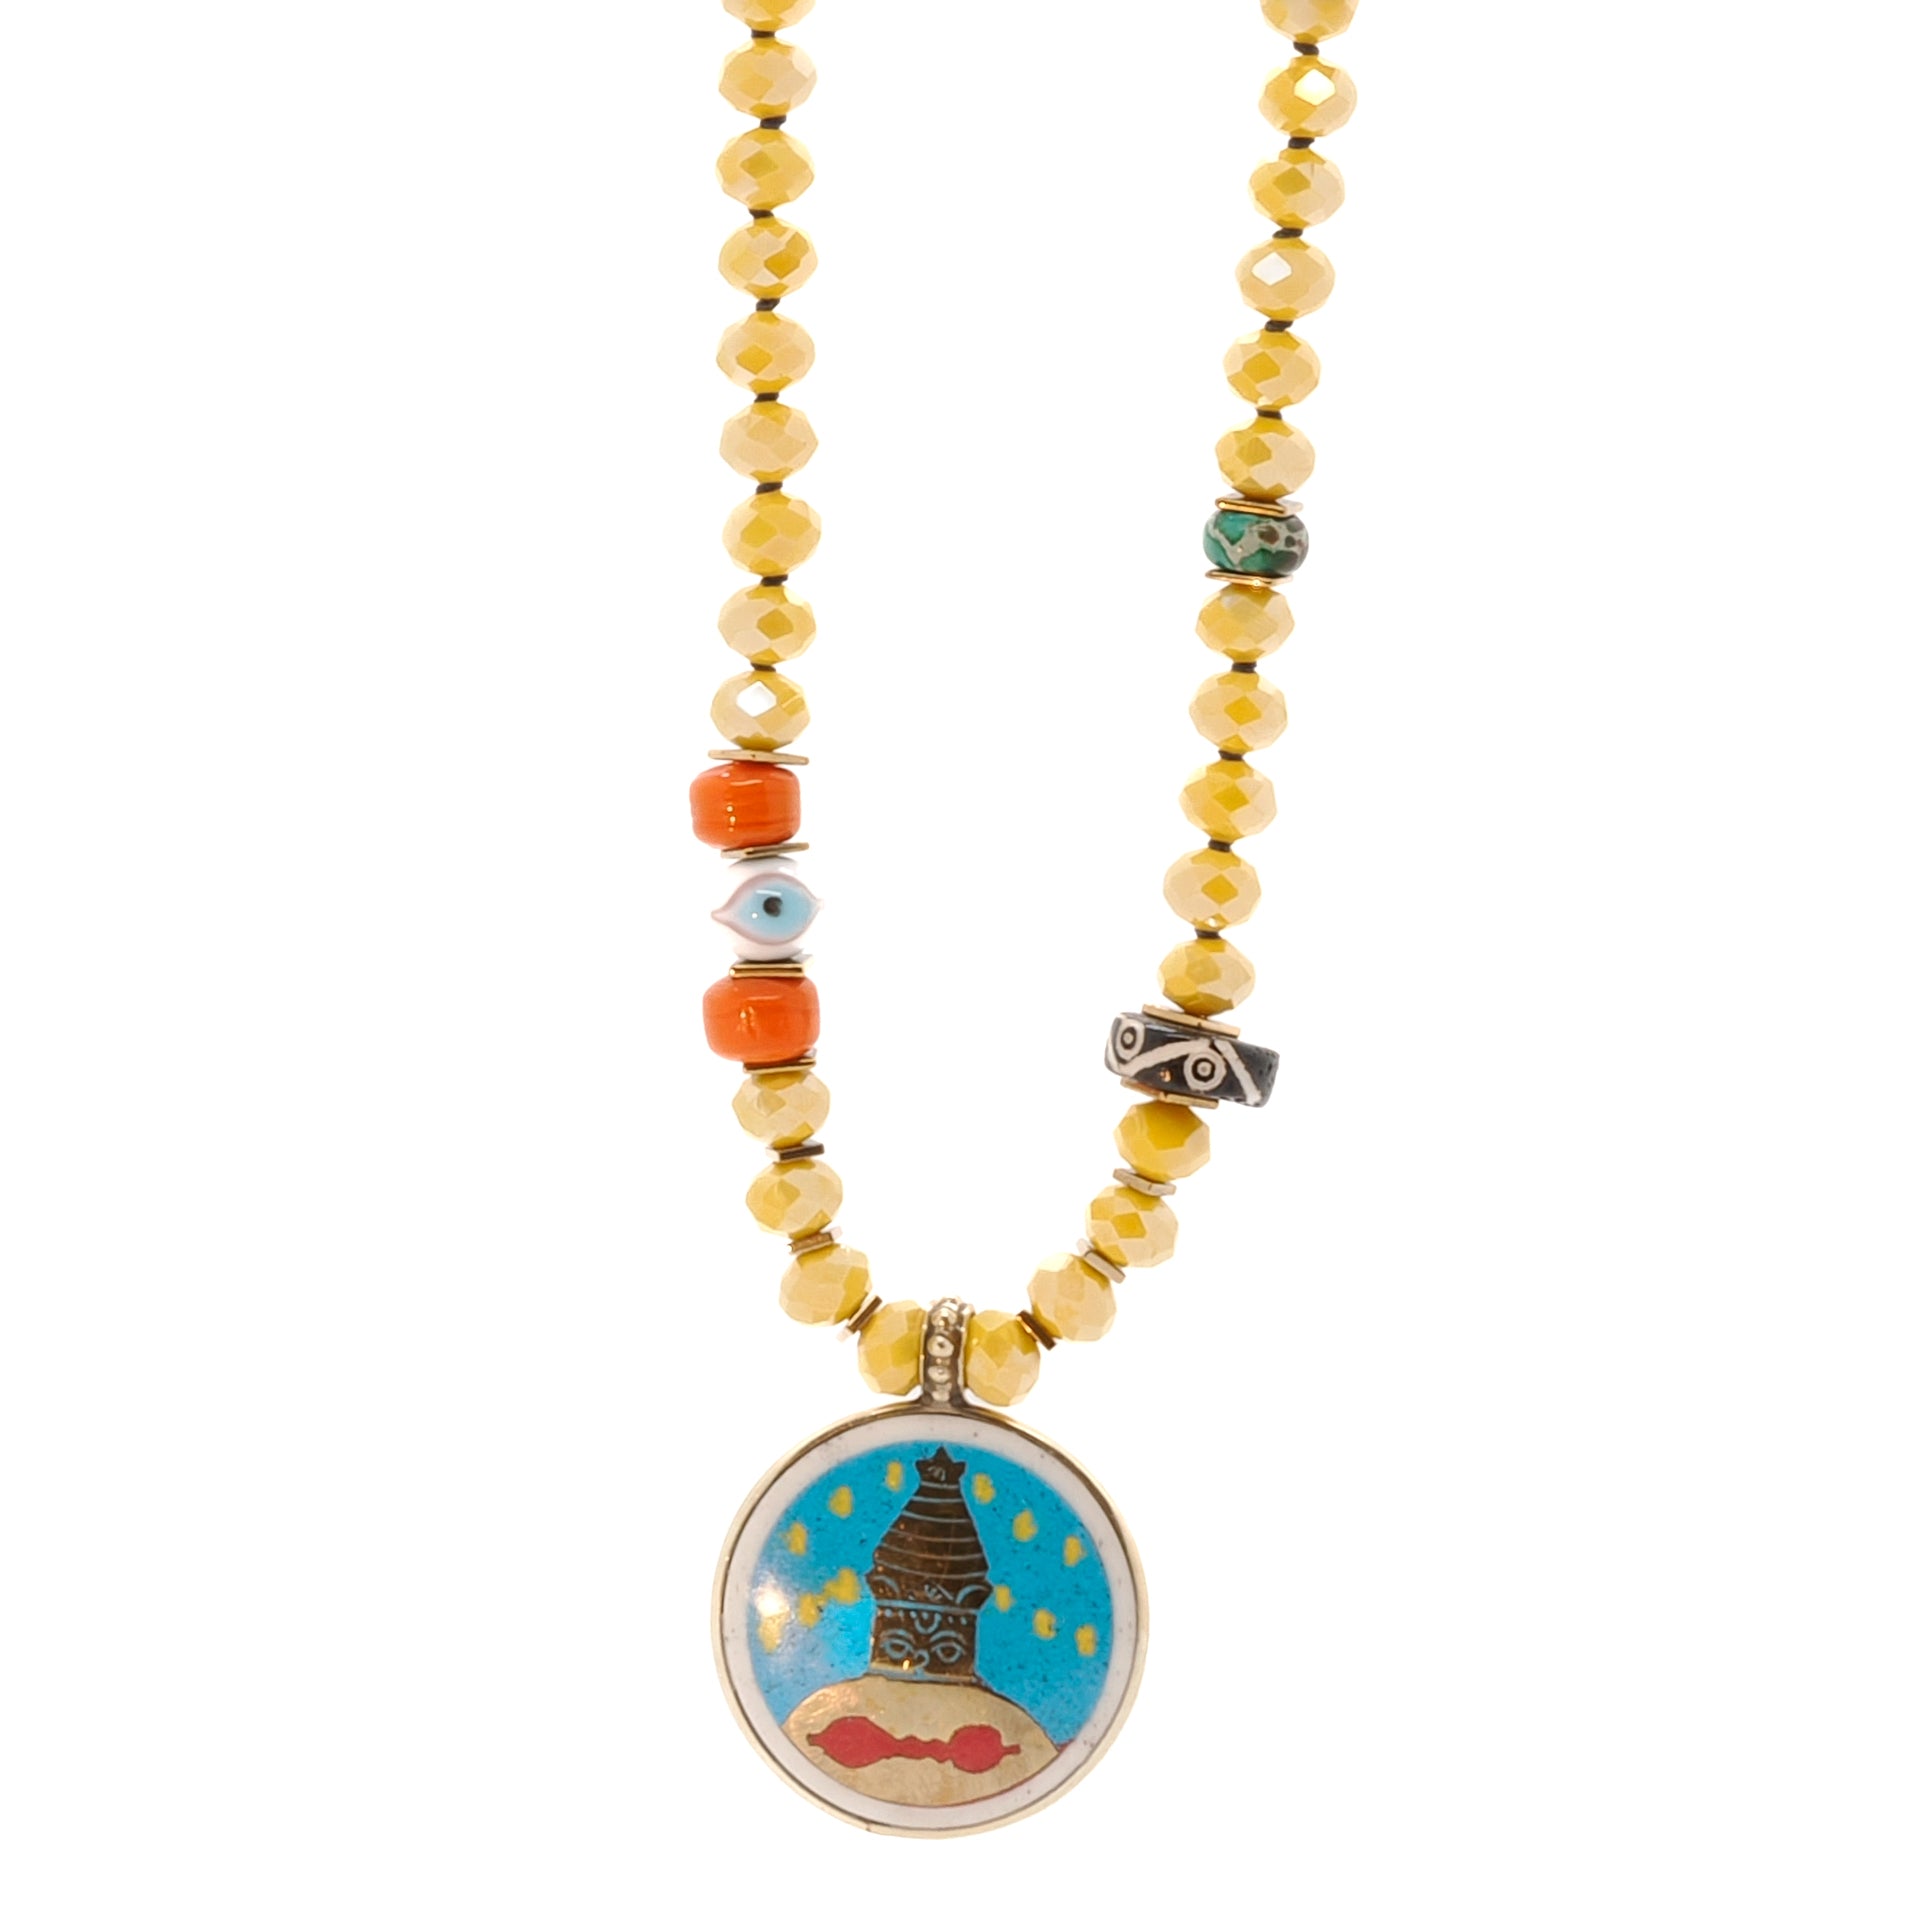 Handmade Yoga Serenity Necklace featuring vibrant colors, Om Mantra, Buddha Eyes, and evil eye beads.